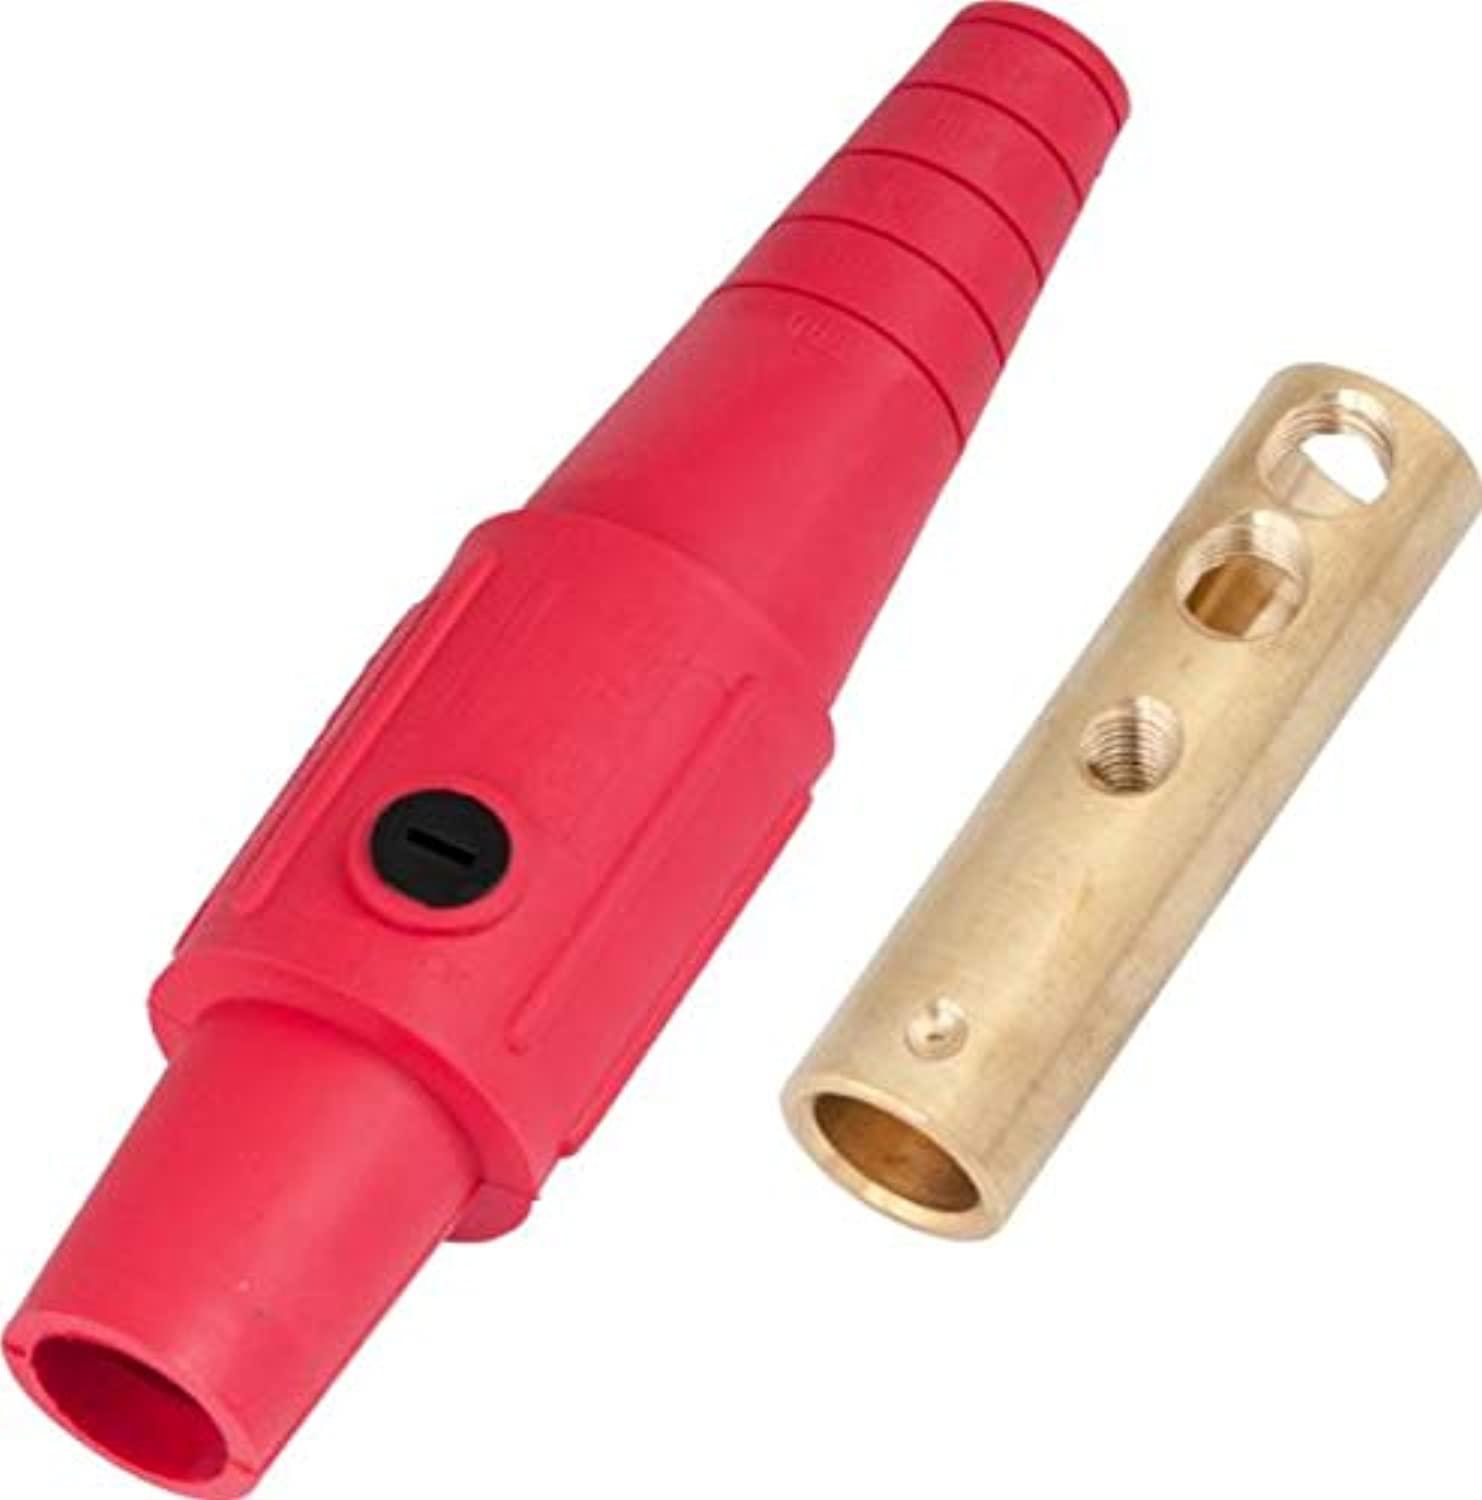 Marinco Power Products - Industrial marinco cls40fb-c cls cam type, series 16 inline, single pin connector, 400 amp, 600 volt, 2/0-4/0 awg, female - red (c)